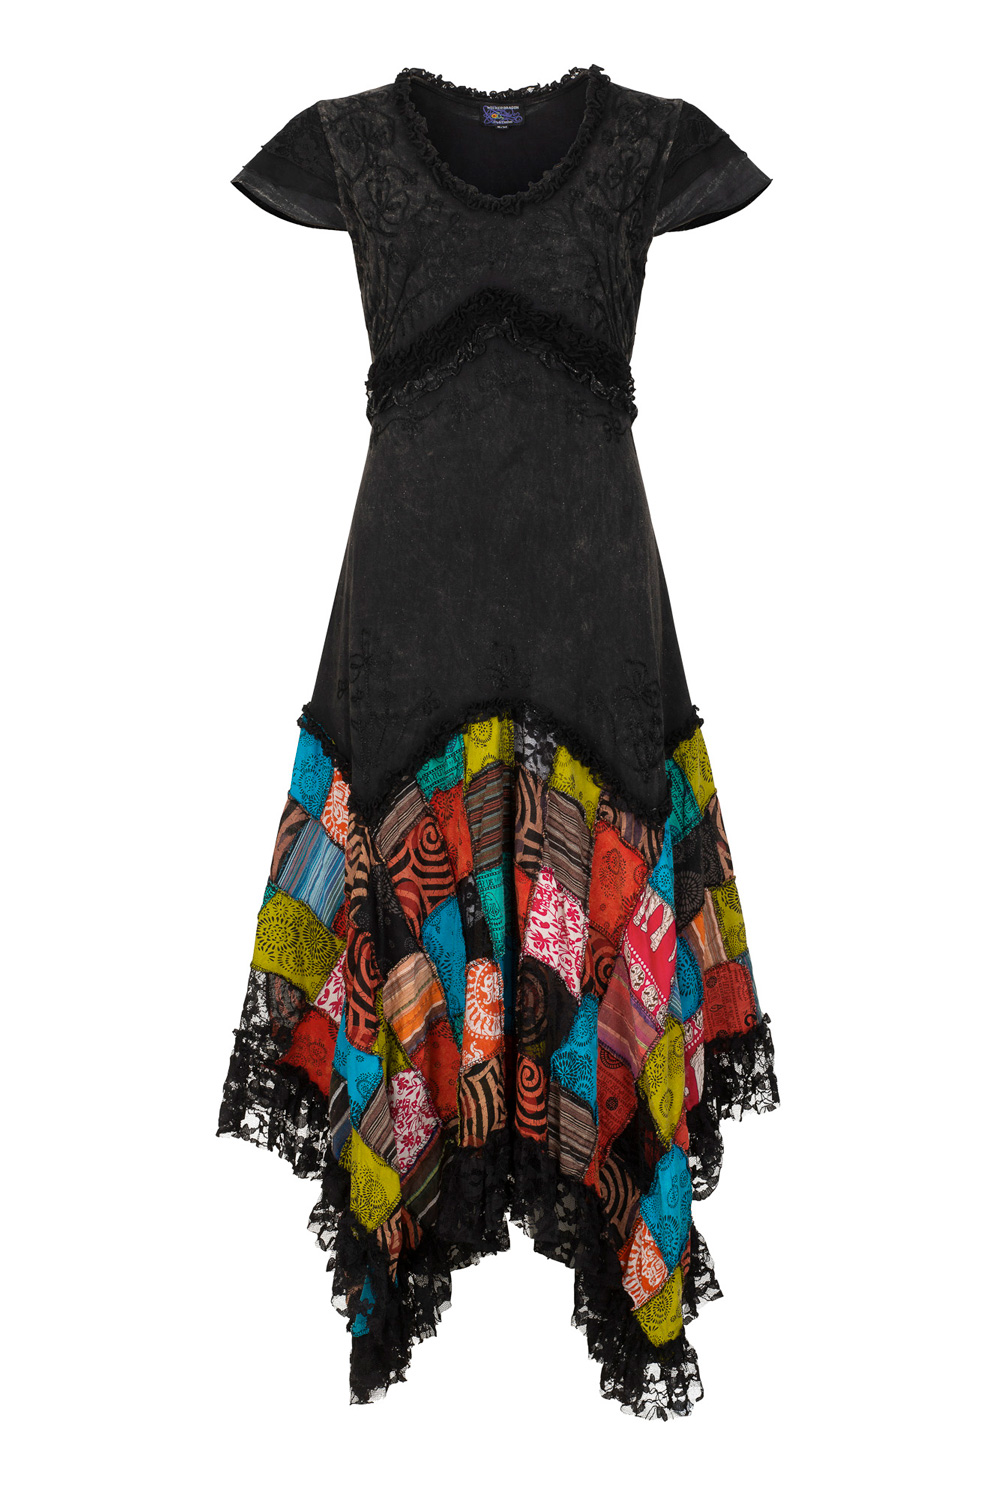 Long patchwork dress with cap sleeves - Black S/M only